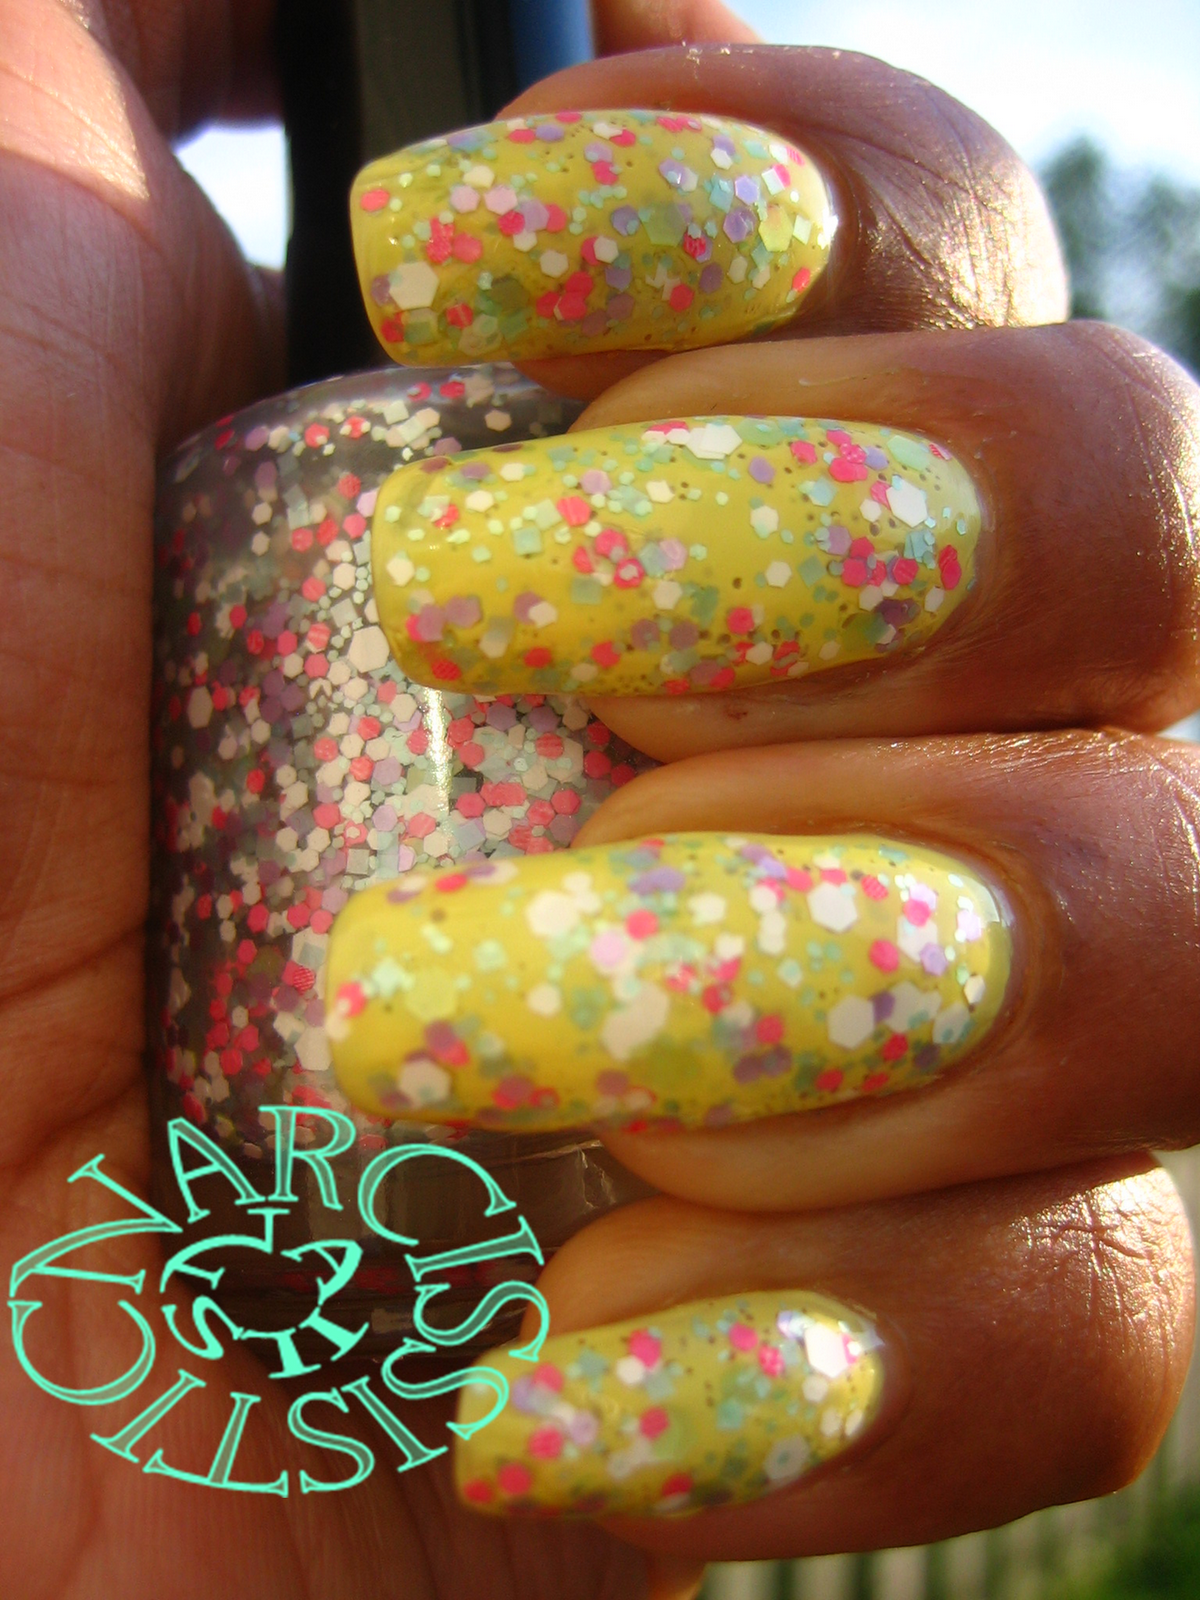 Narcissistic Nails: Look Book: Jelly Belly Taffy